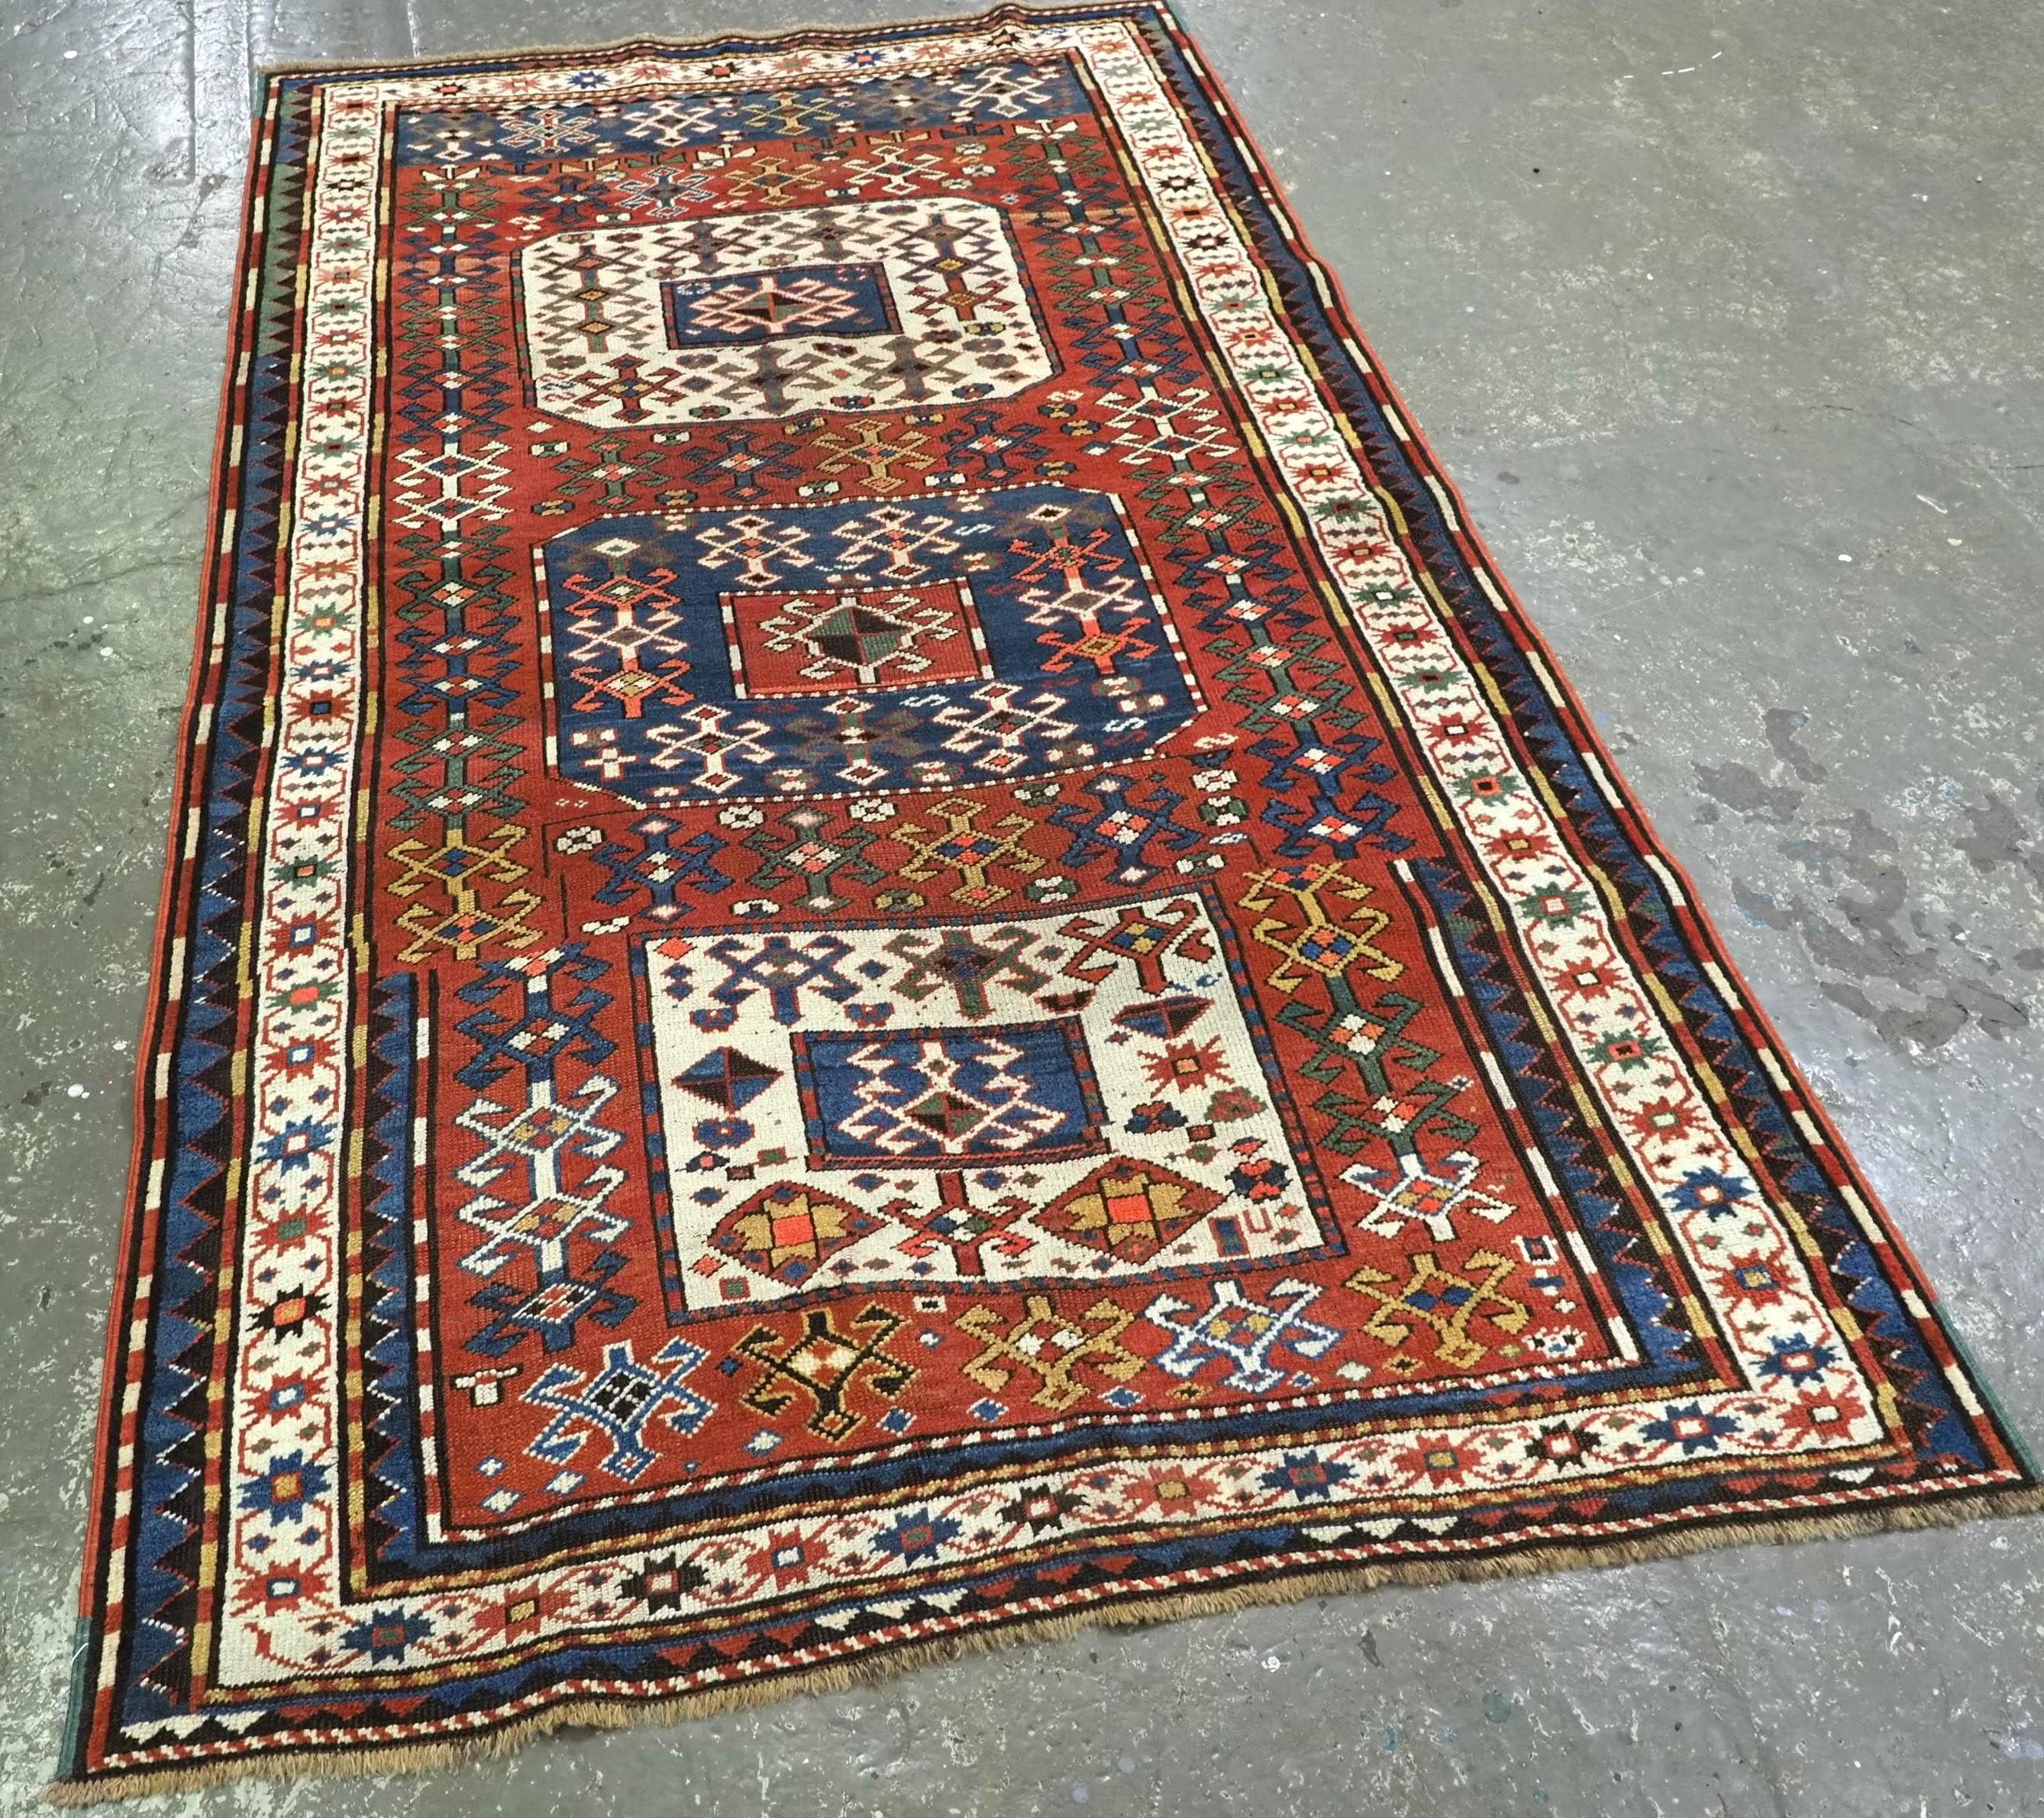 Size: 7ft 0in x 4ft 3in (213 x 129cm).

Antique Caucasian Chajli long rug with triple medallion design.

Circa 1880.

A good example of a Chajli rug, with the traditional three medallion design. This rug has some very unusual design variations; the